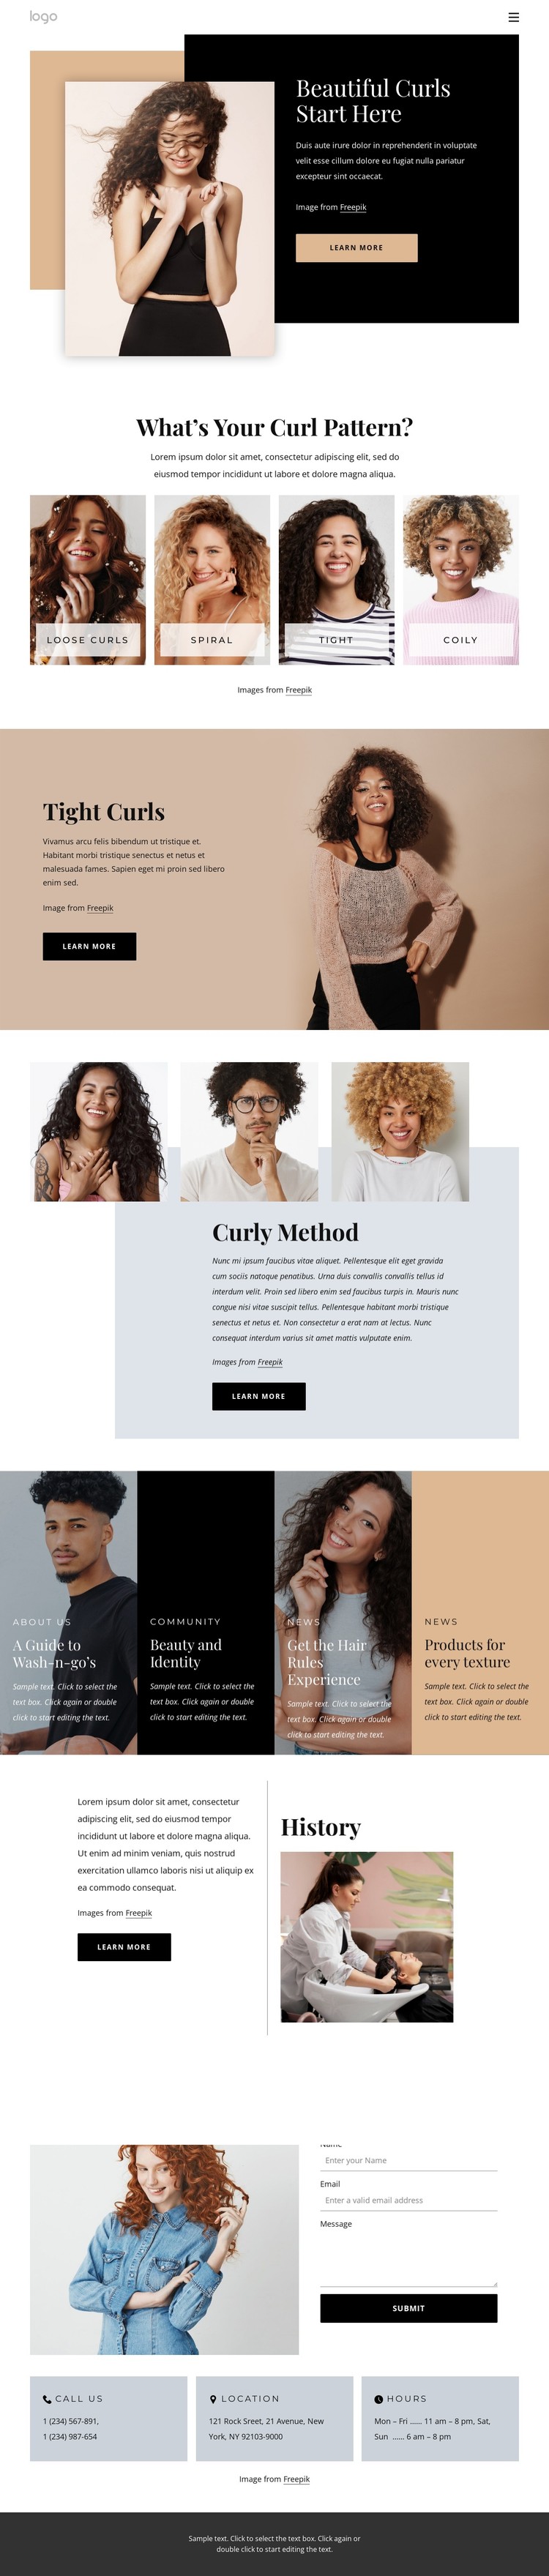 Bring out the best in your curls Static Site Generator